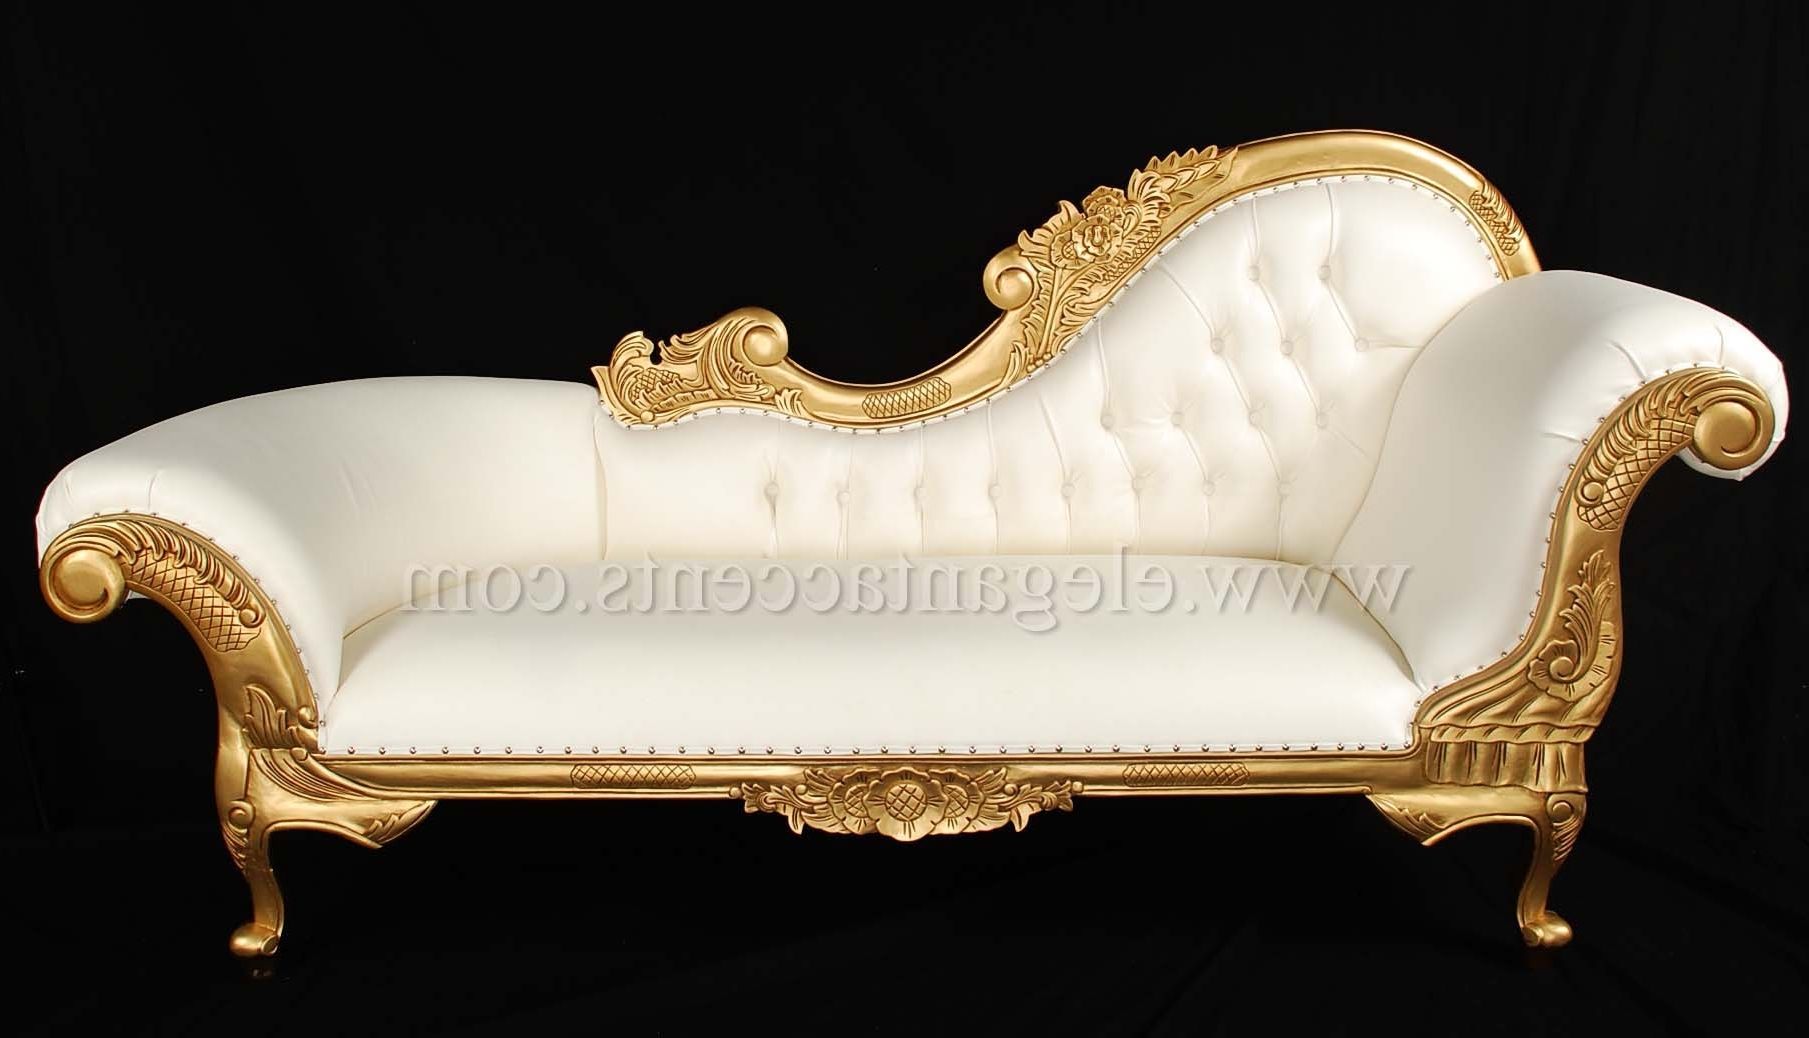 Fashionable Chaise Lounge Chairs In Toronto With Regard To This Truly Sumptuous "hood" Chaise Lounge, With Stylized Carving (View 10 of 15)